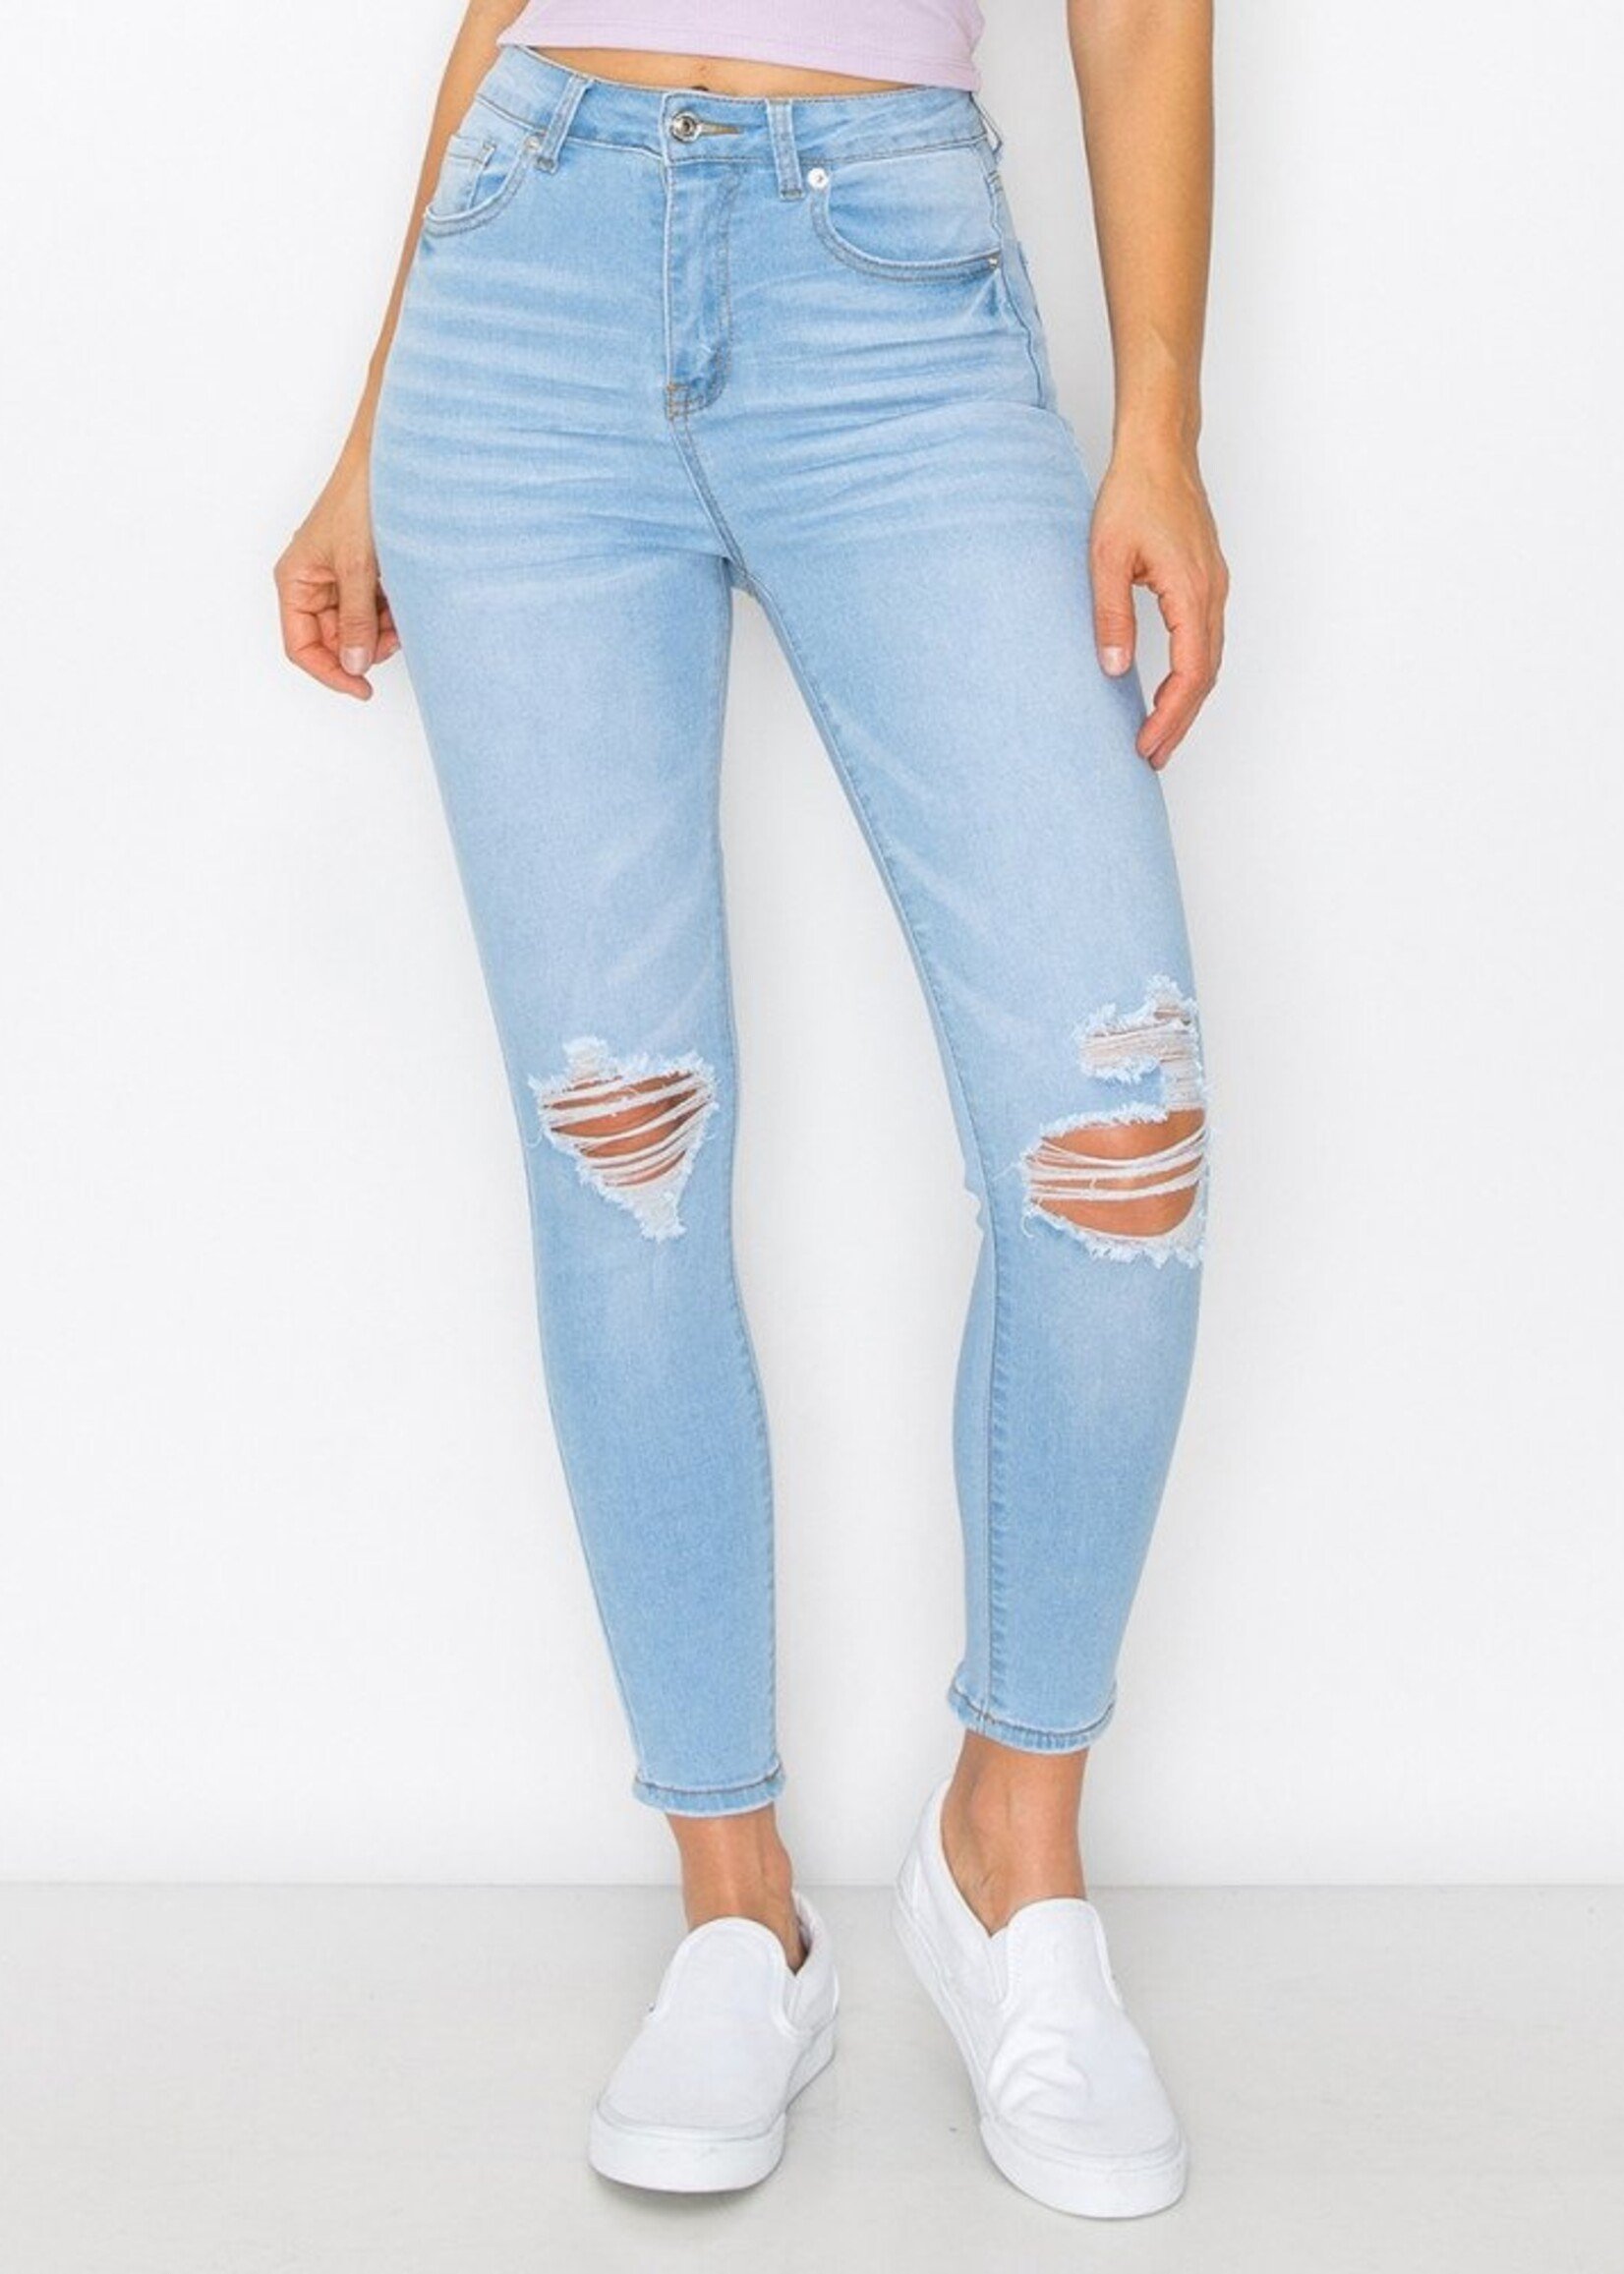 WAX Solid High Waisted Skinny Jeans - Light Wash